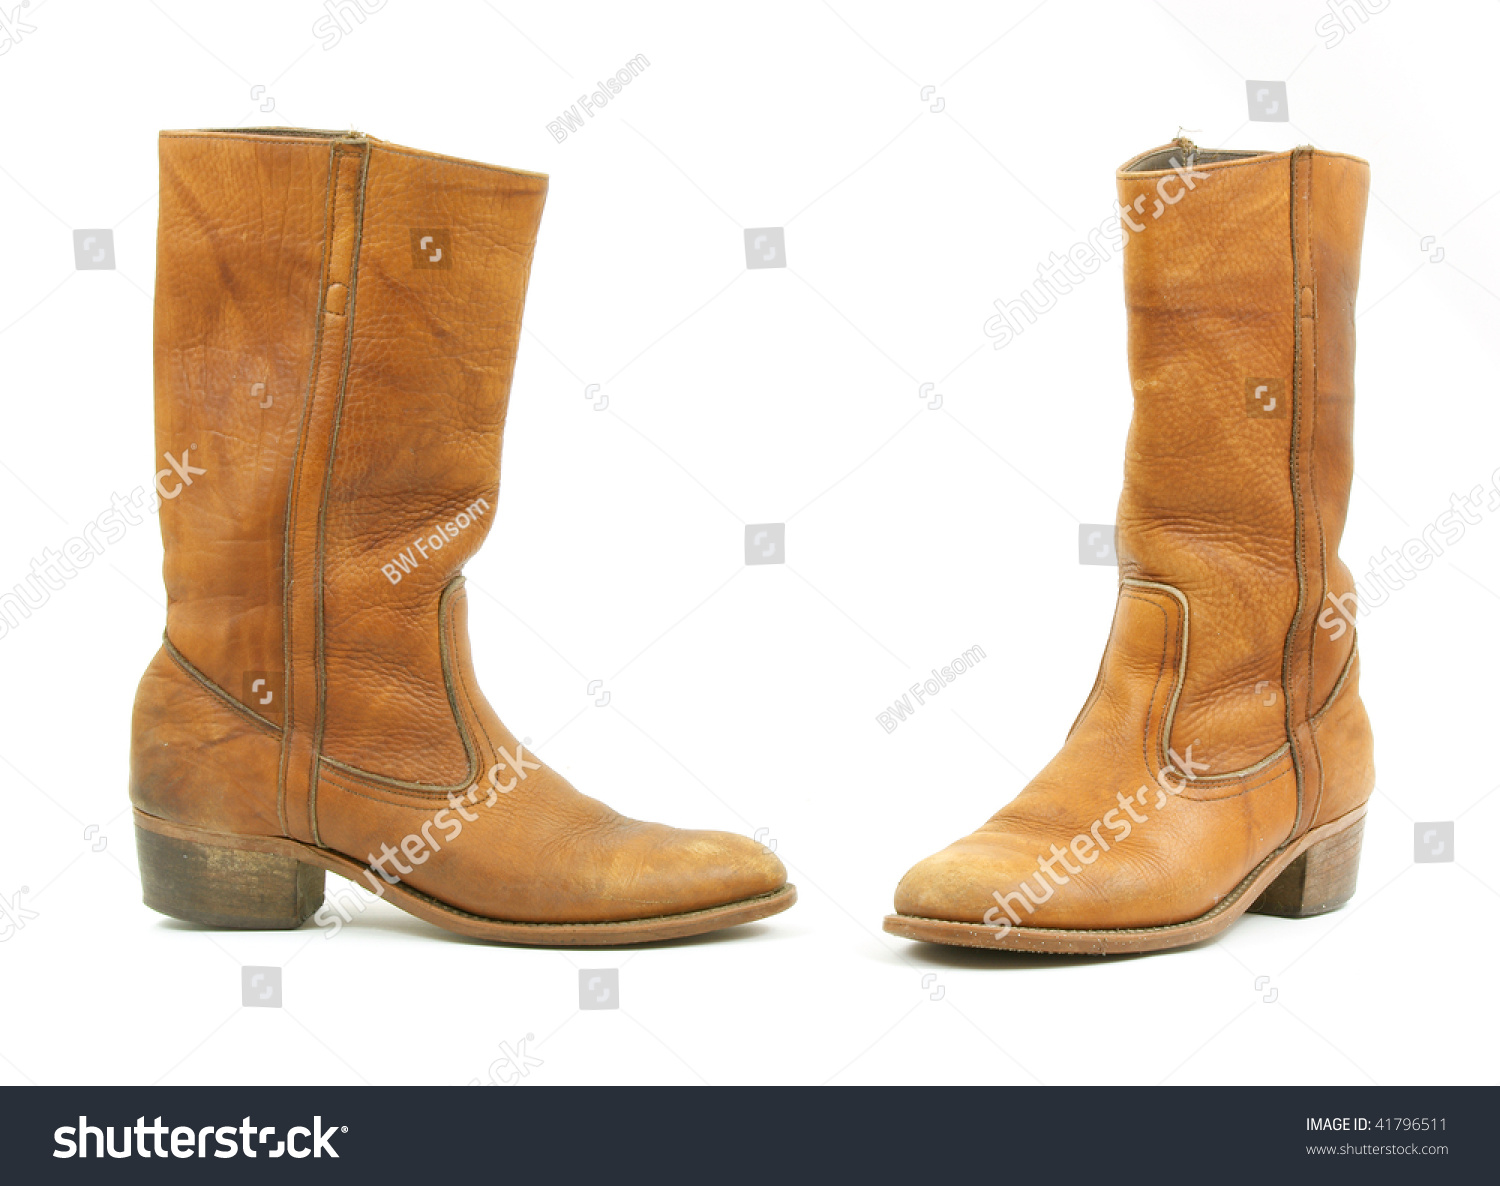 Old Leather Boots Stock Photo 41796511 : Shutterstock